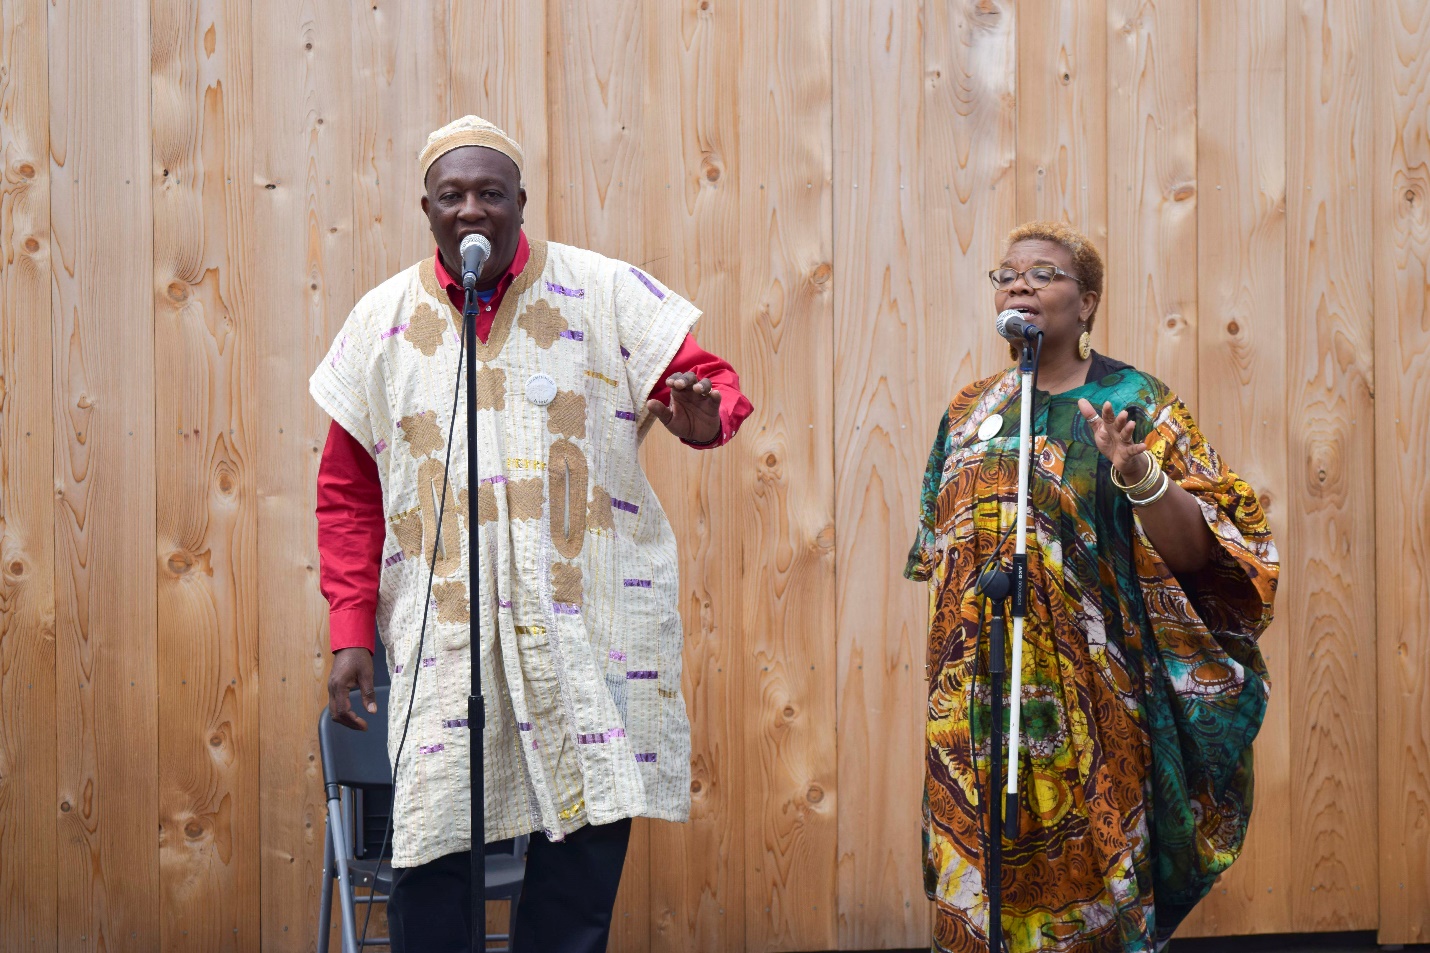 Ron and Natalie Daise perform Gullah songs from the South Carolina coast.